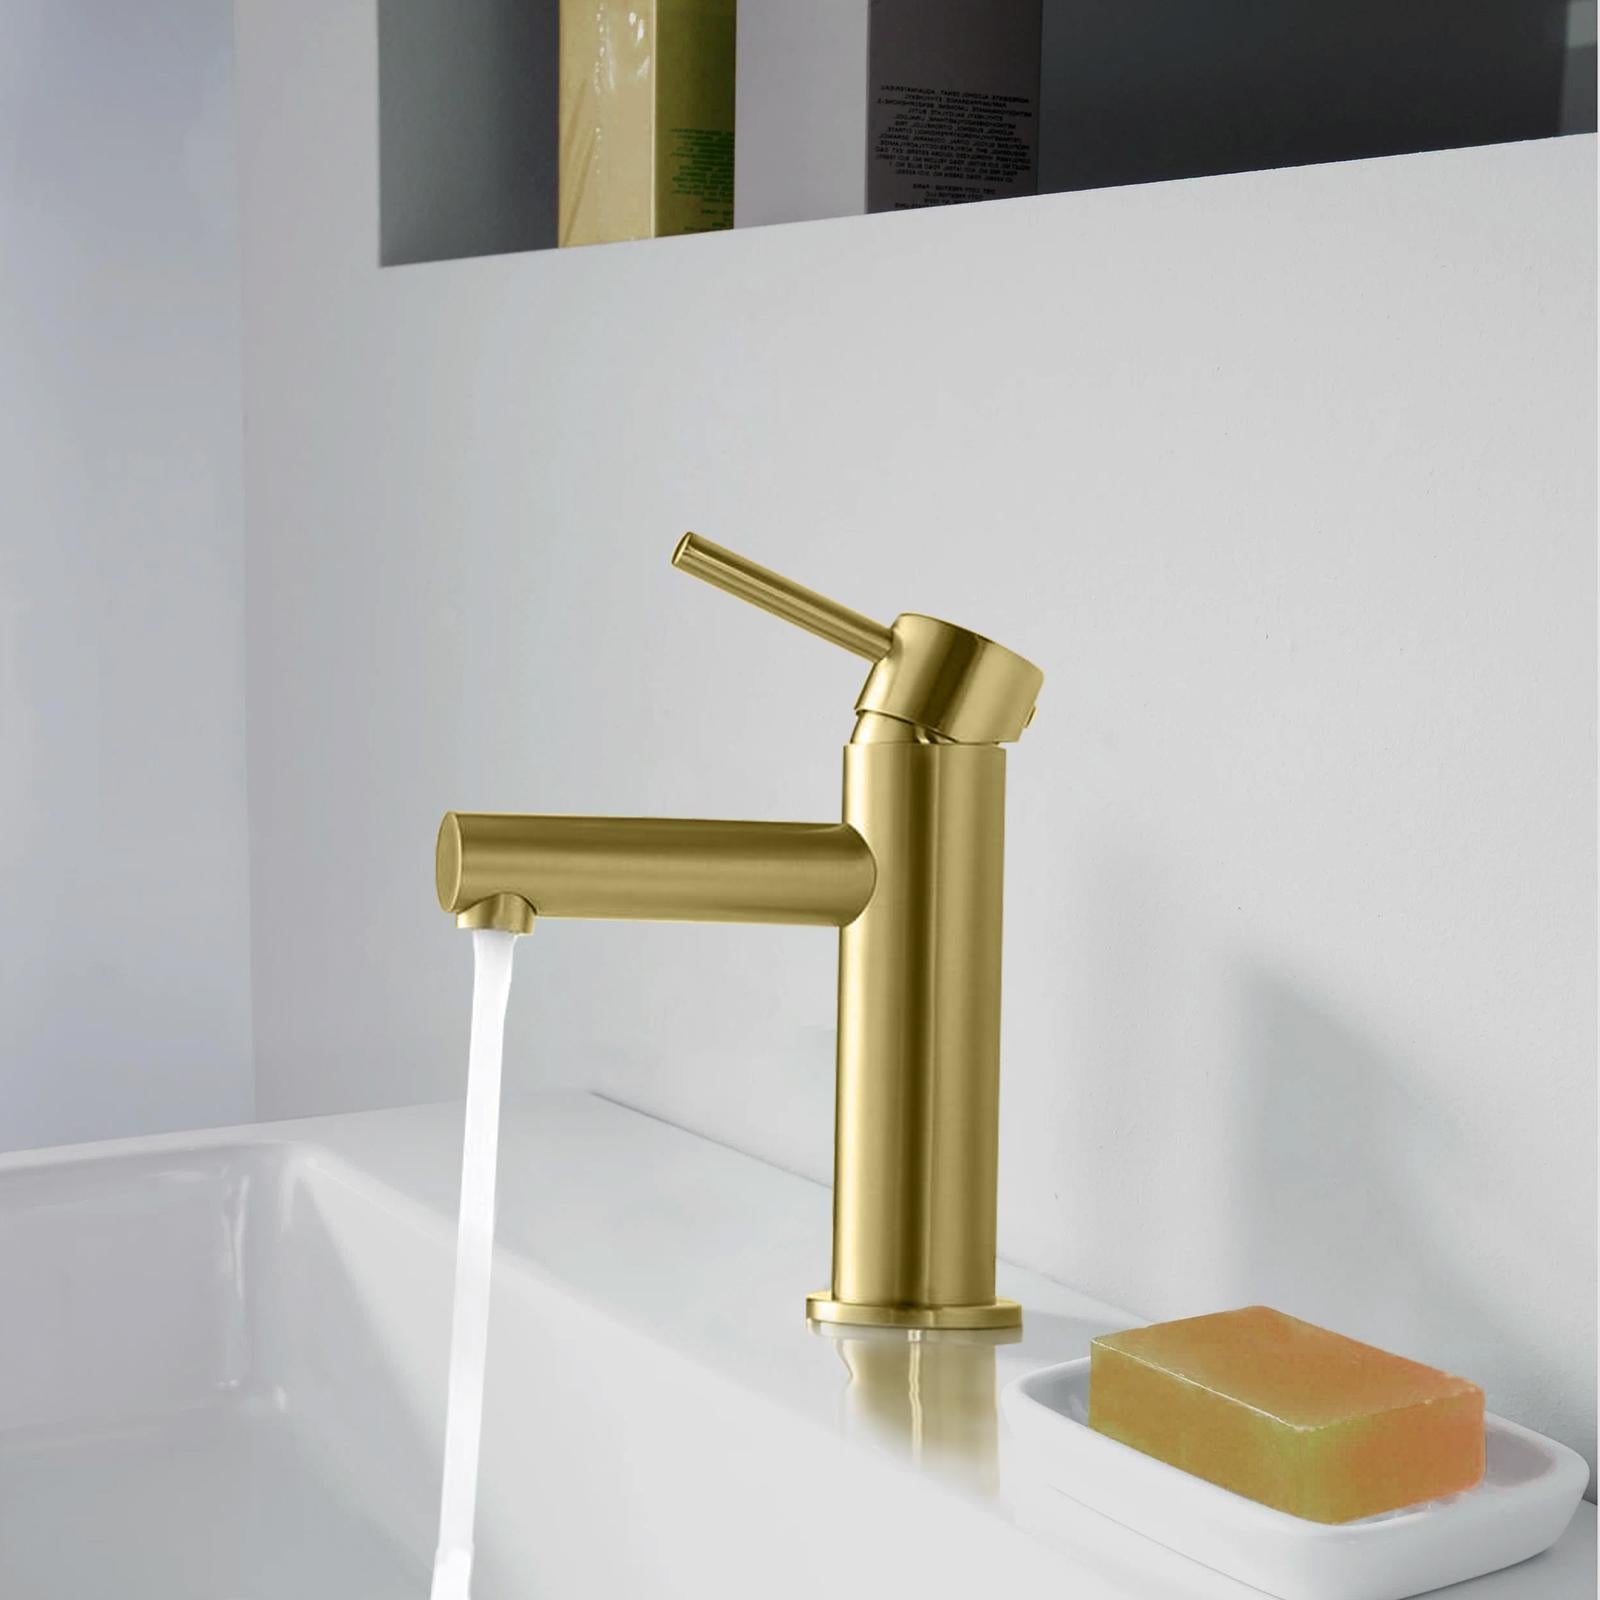 Modern Single Hole Single Handle Bathroom Faucet, Vanity Lavatory Faucet for Bathroom Sink Mixer Tap,1.2 GPM Water Flow